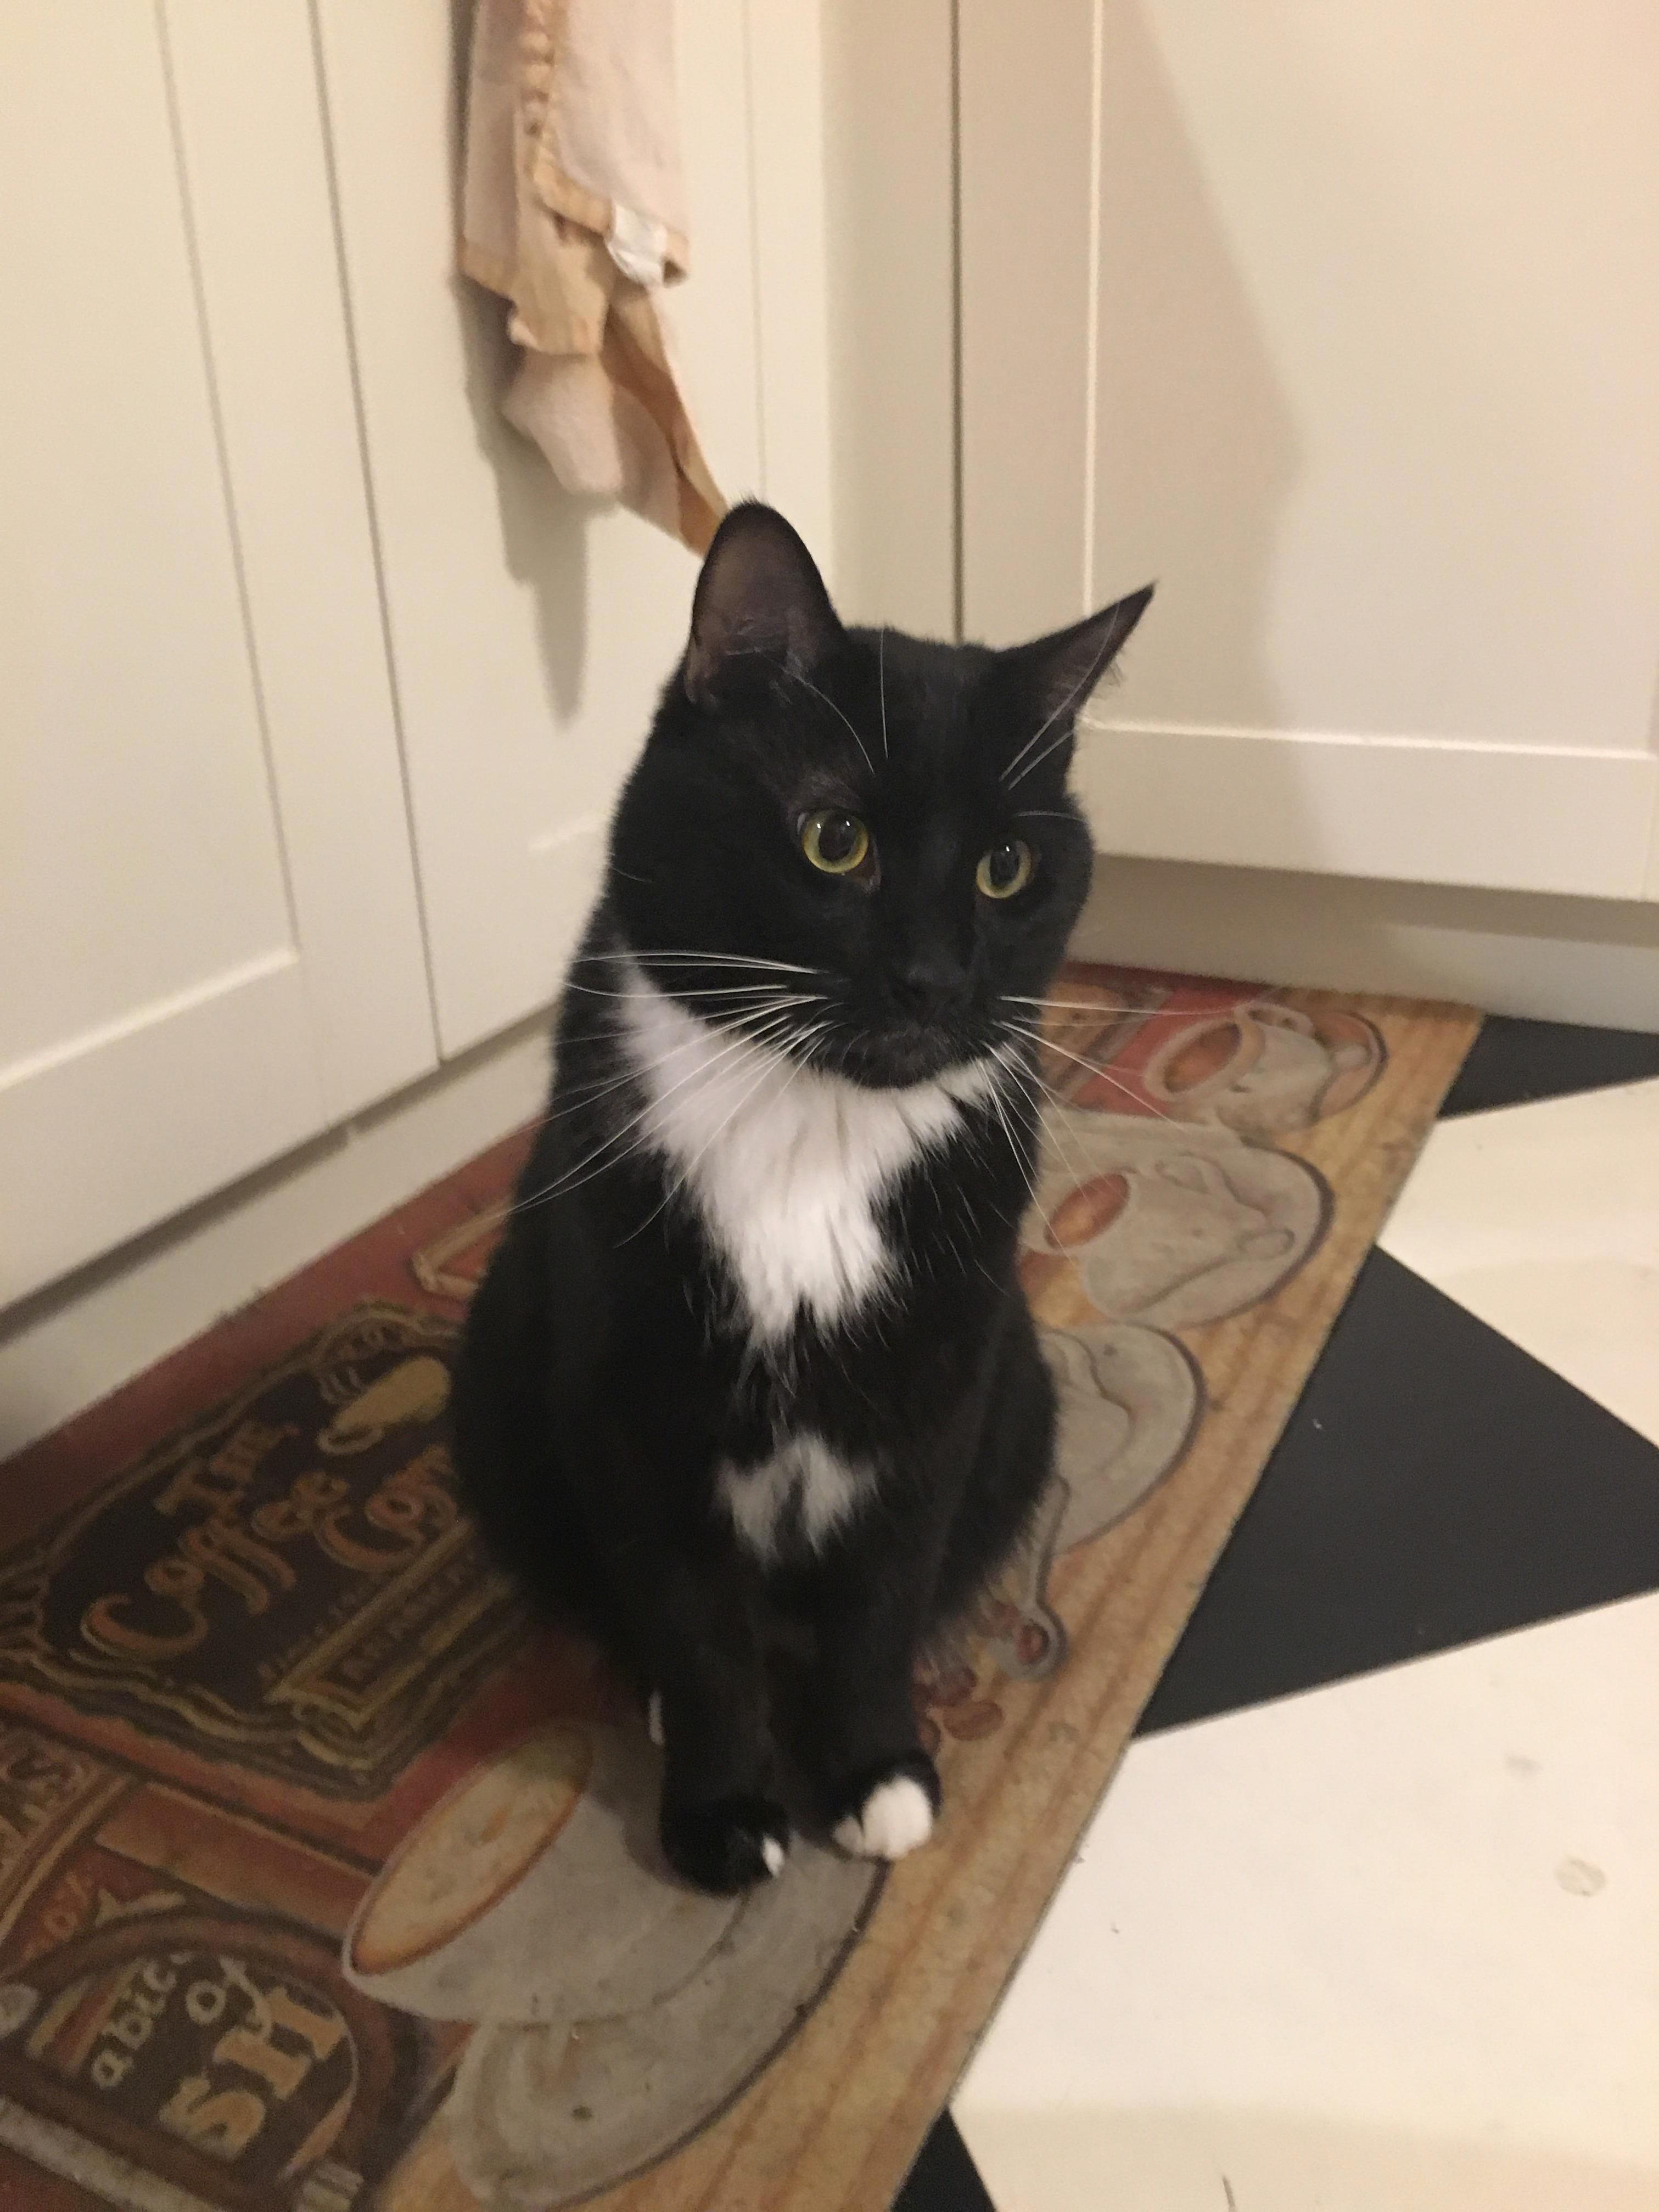 Sheldon matches our kitchen floor and wears tuxedo